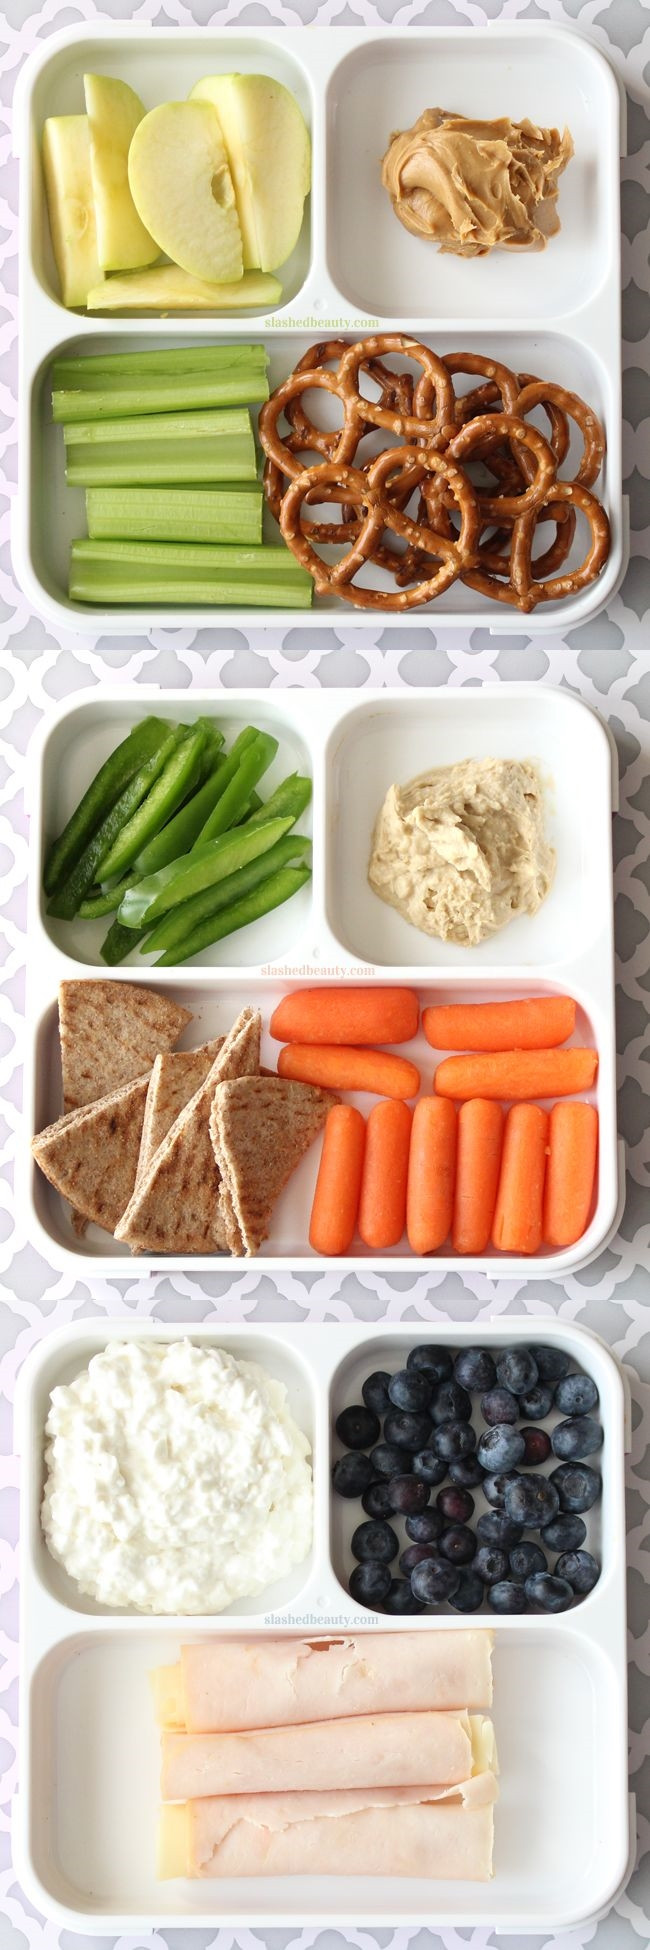 Healthy Snacks To Take To Work
 Need some healthy snack inspiration for work or school